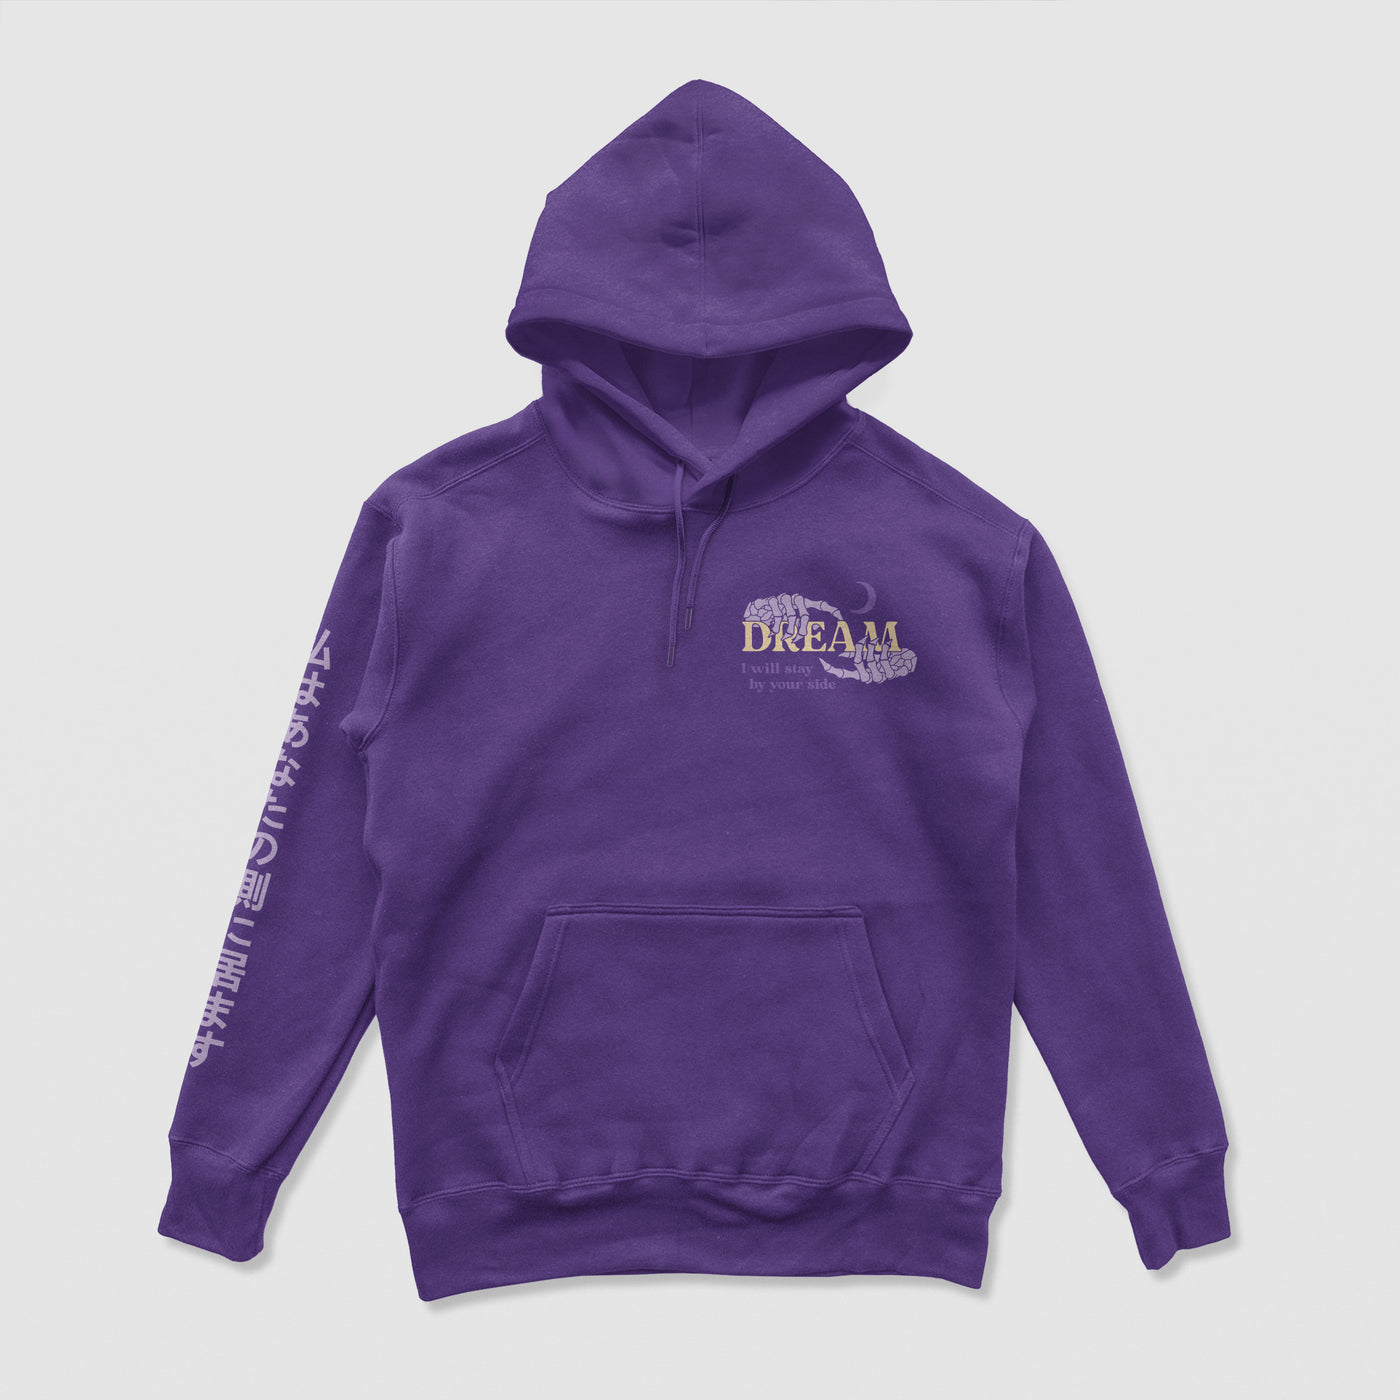 I Will Stay By Your Side Hoodie
Introducing "I Will Stay By Your Side," a design that beautifully captures the emotions of Separation Anxiety, Fear, and Comfort. This message serves as a source ofDREAM Clothing 